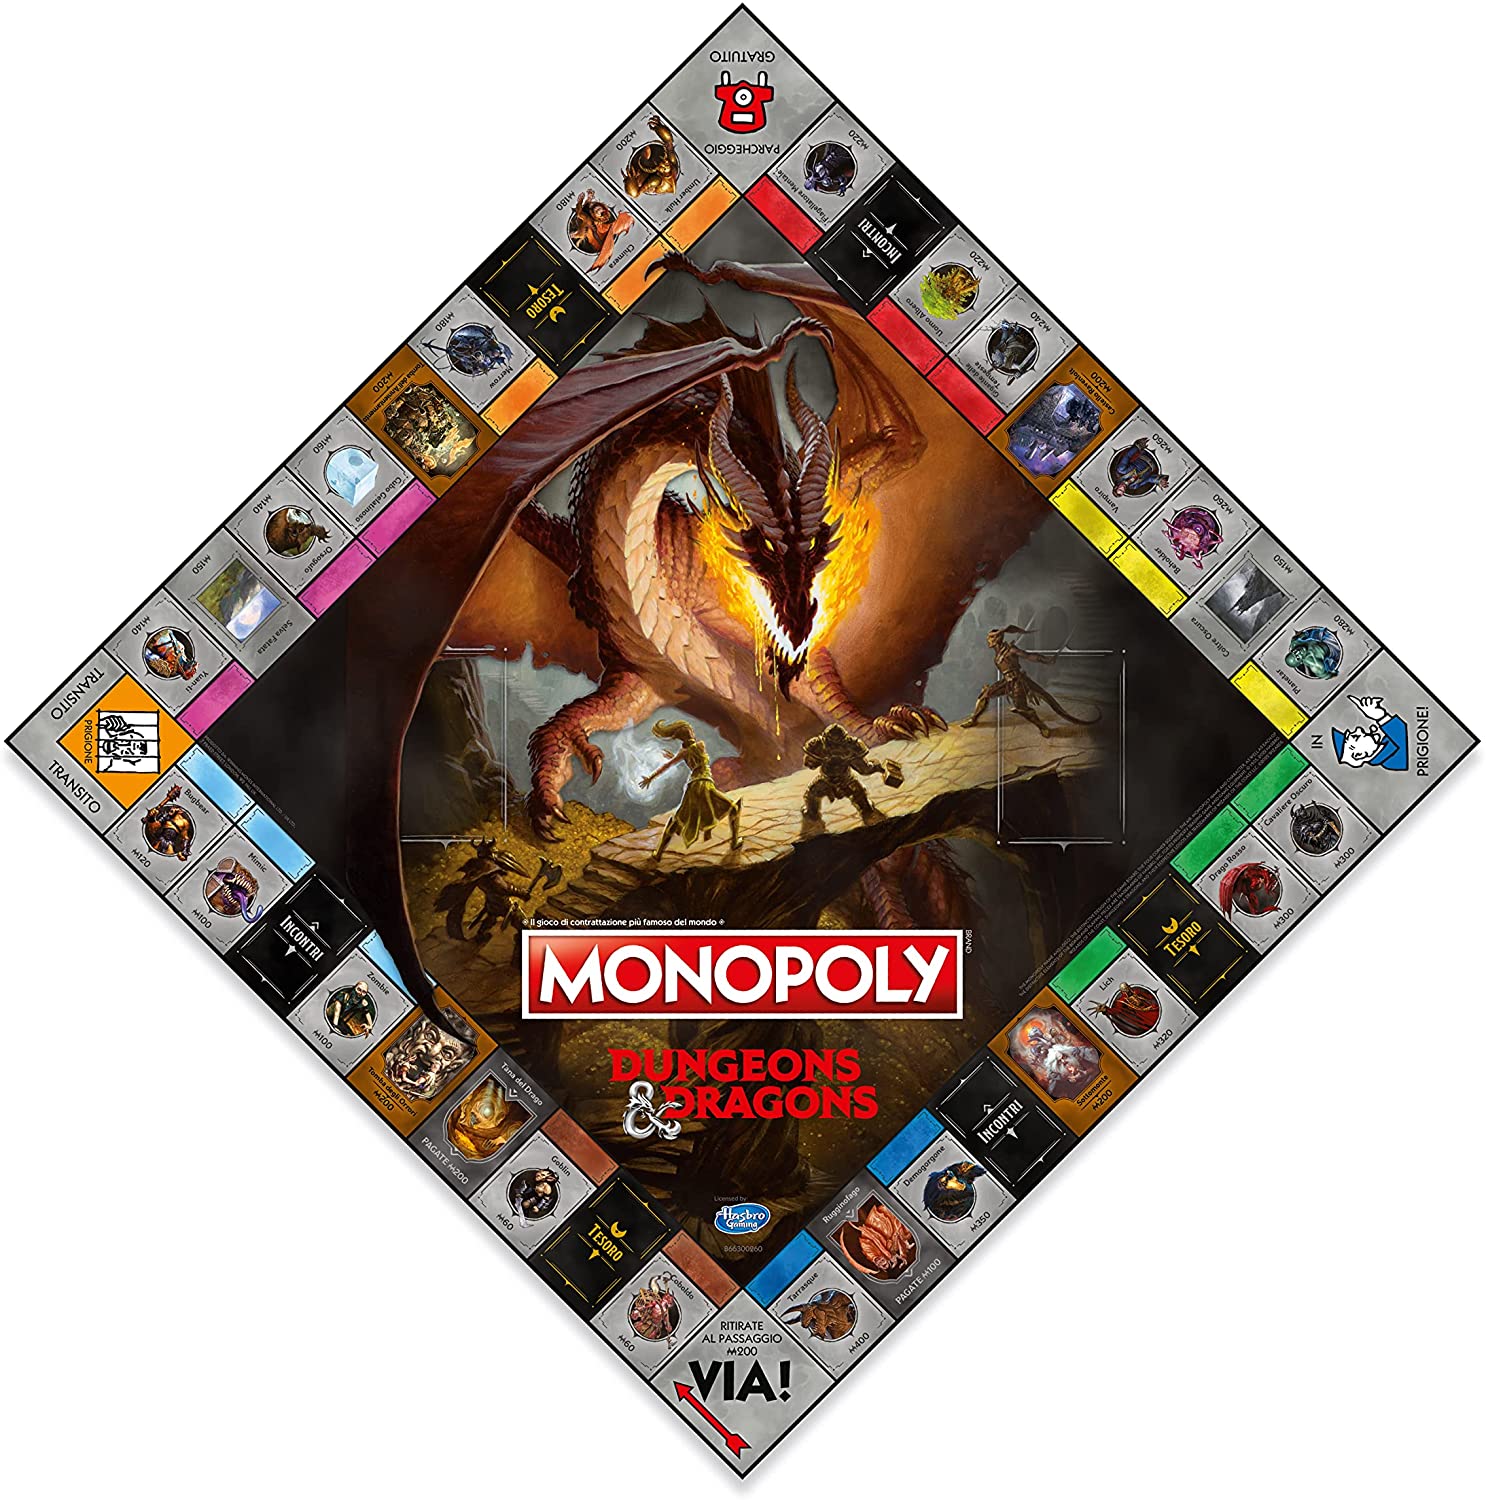 Monopoly Dungeons and Dragons